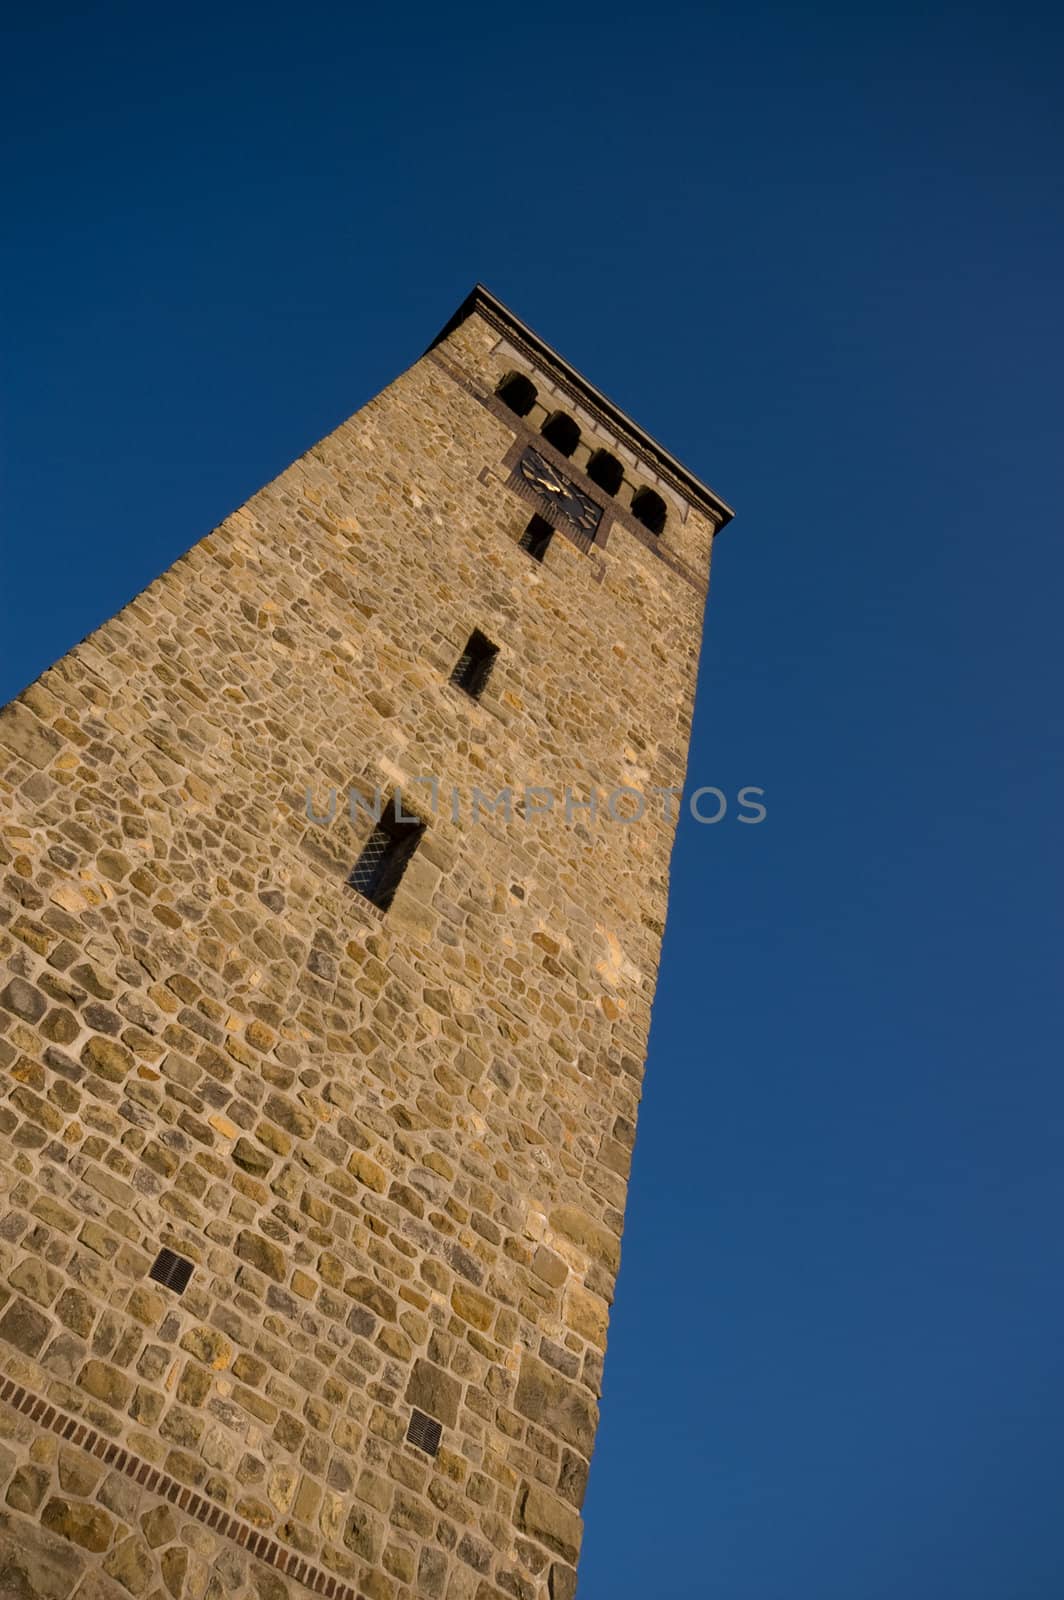 church tower made from sandstone on a blue sky